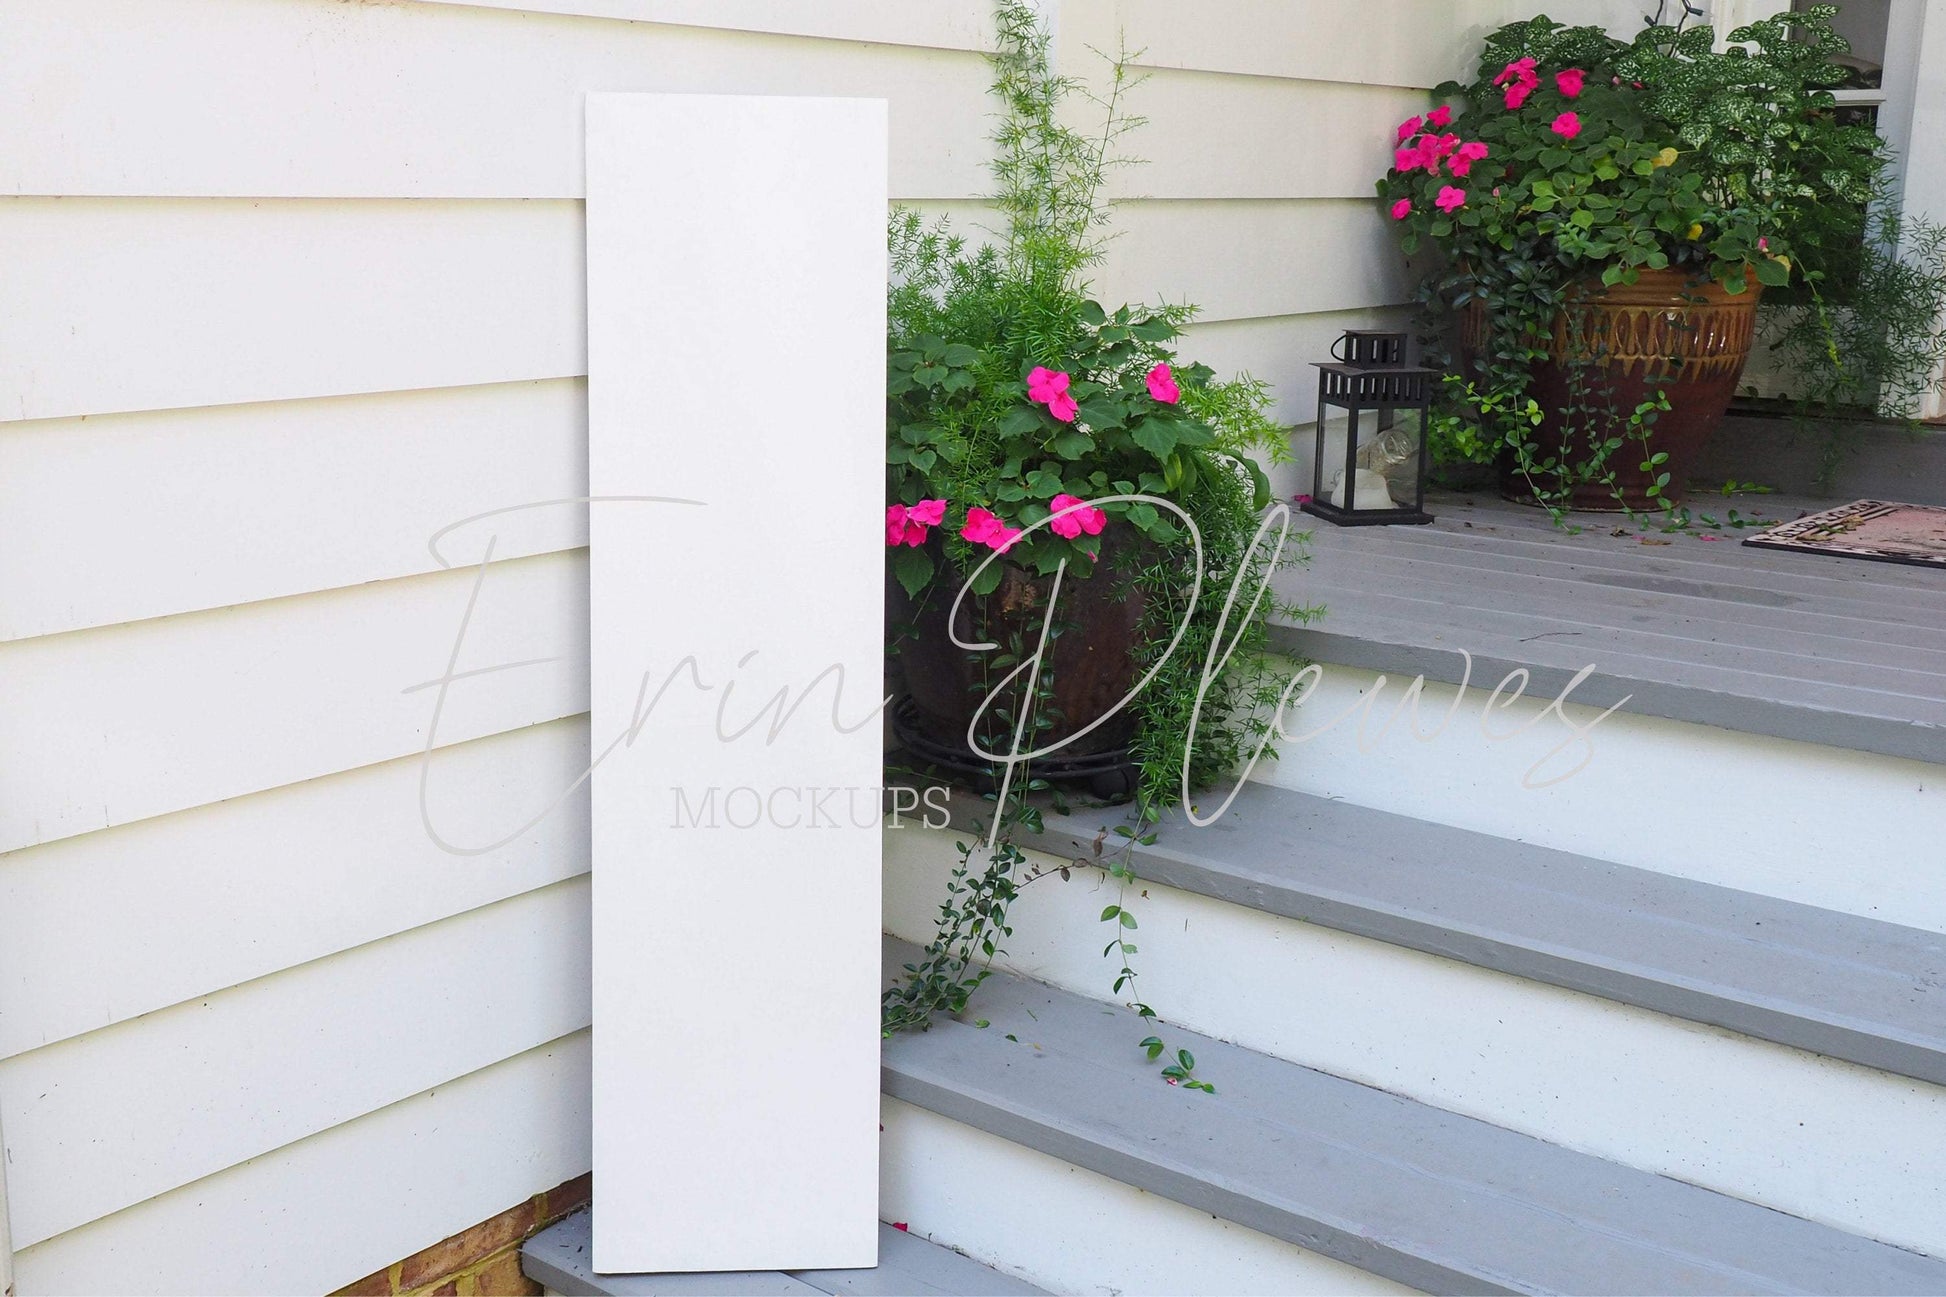 Erin Plewes Mockups Porch Sign Mockup, Rustic White Wood Frame Mock Up 12" x 48", Large Wood Sign Mock-up 1' x 4',  Farmhouse Style Board Template